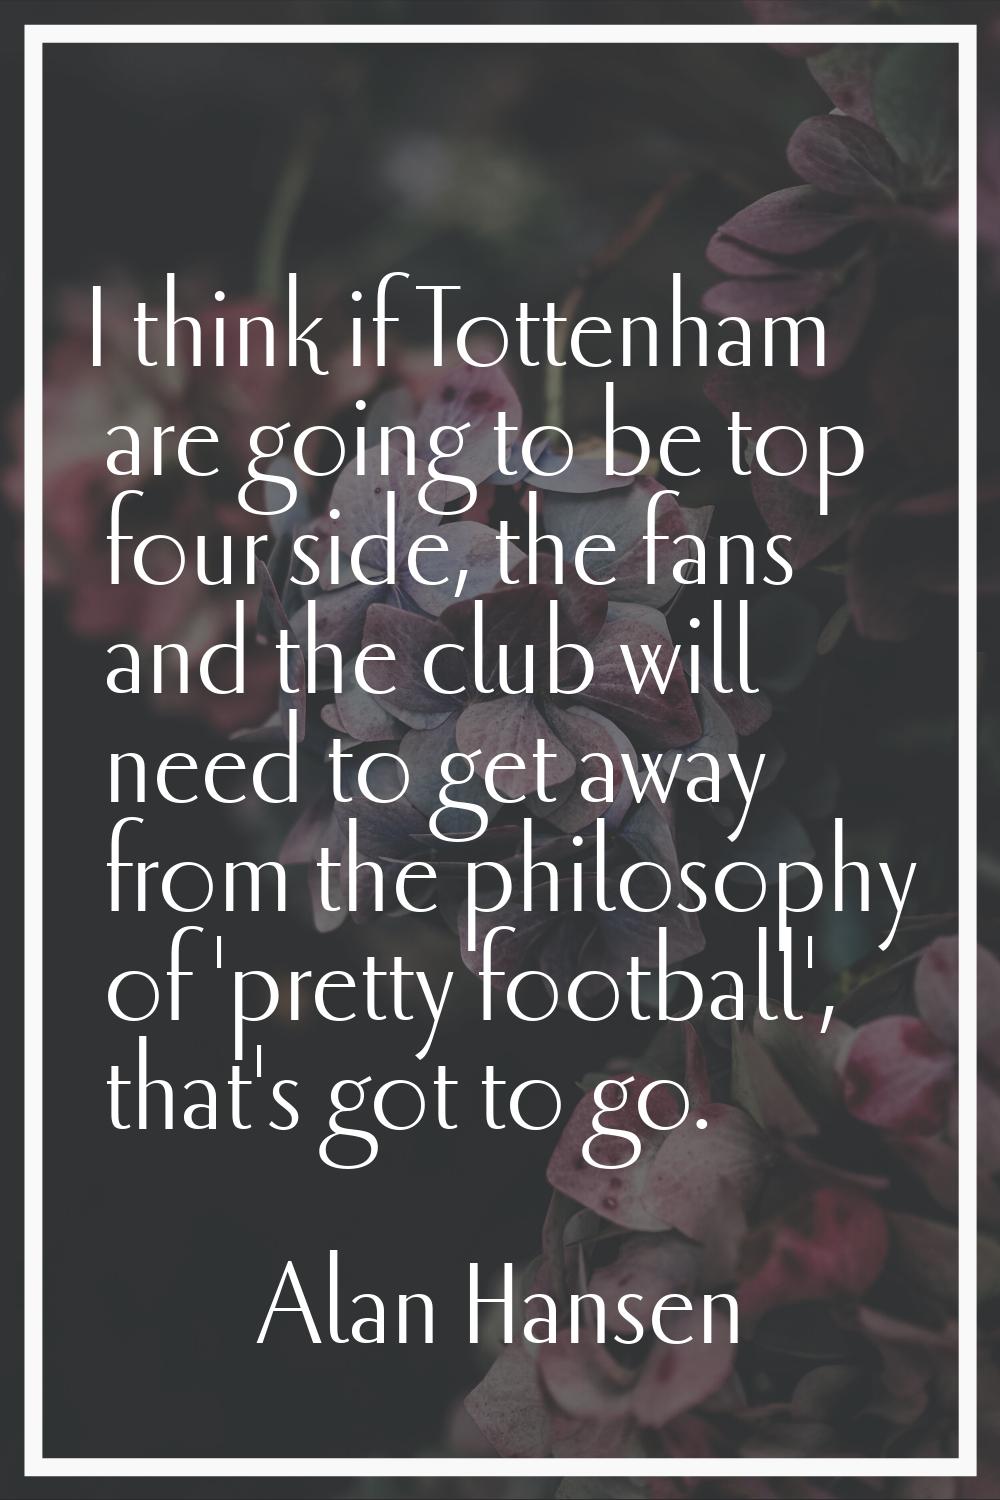 I think if Tottenham are going to be top four side, the fans and the club will need to get away fro